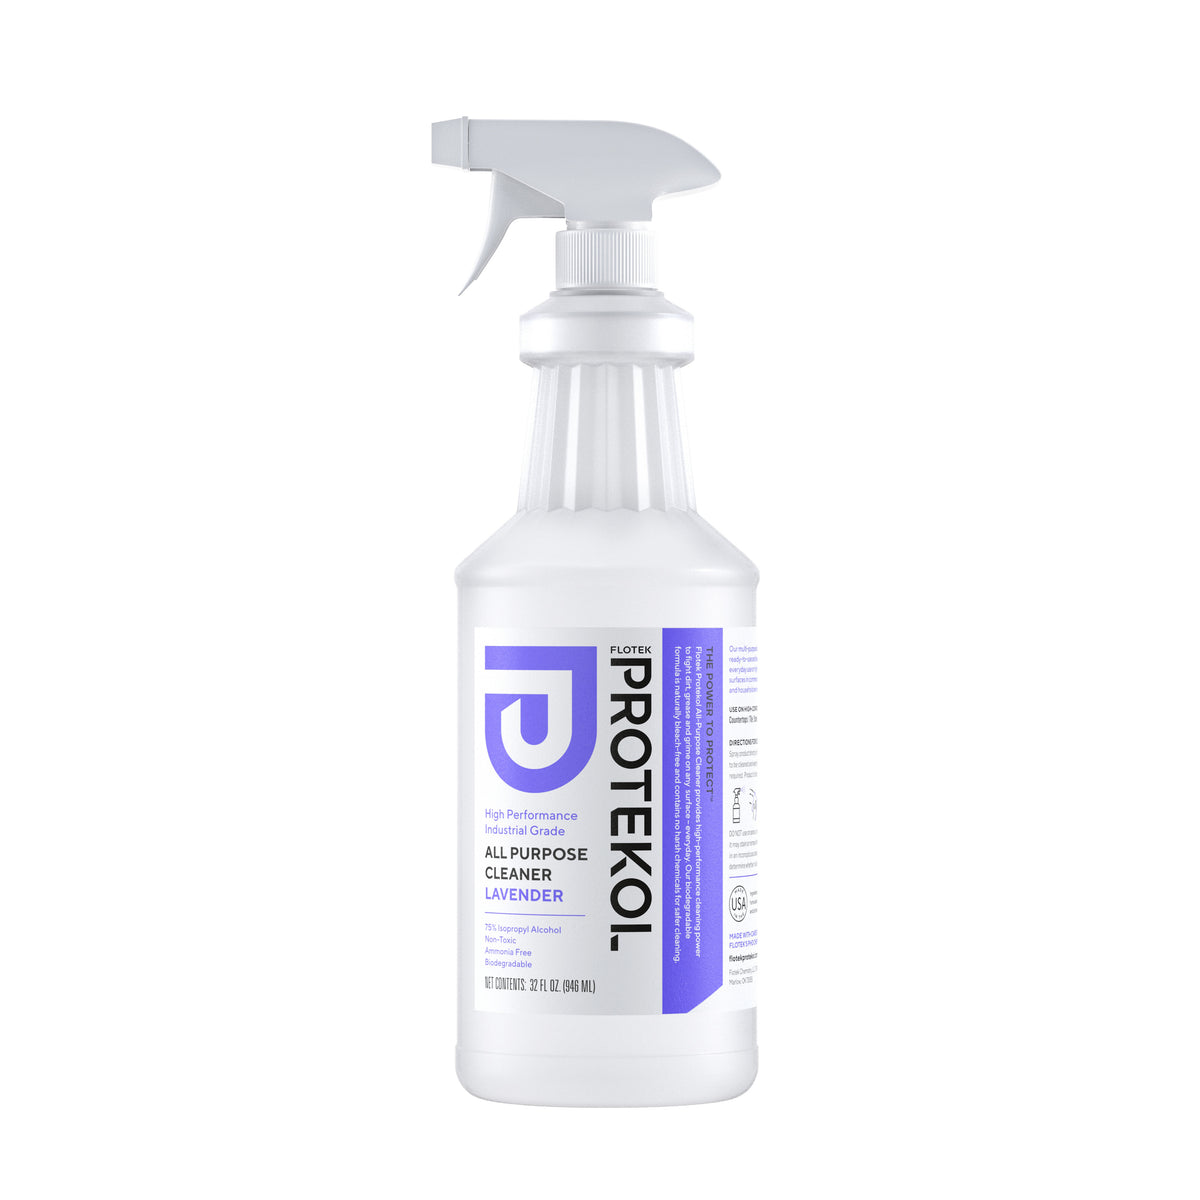 All-Purpose Cleaner with Bleach - 32oz - up & up™